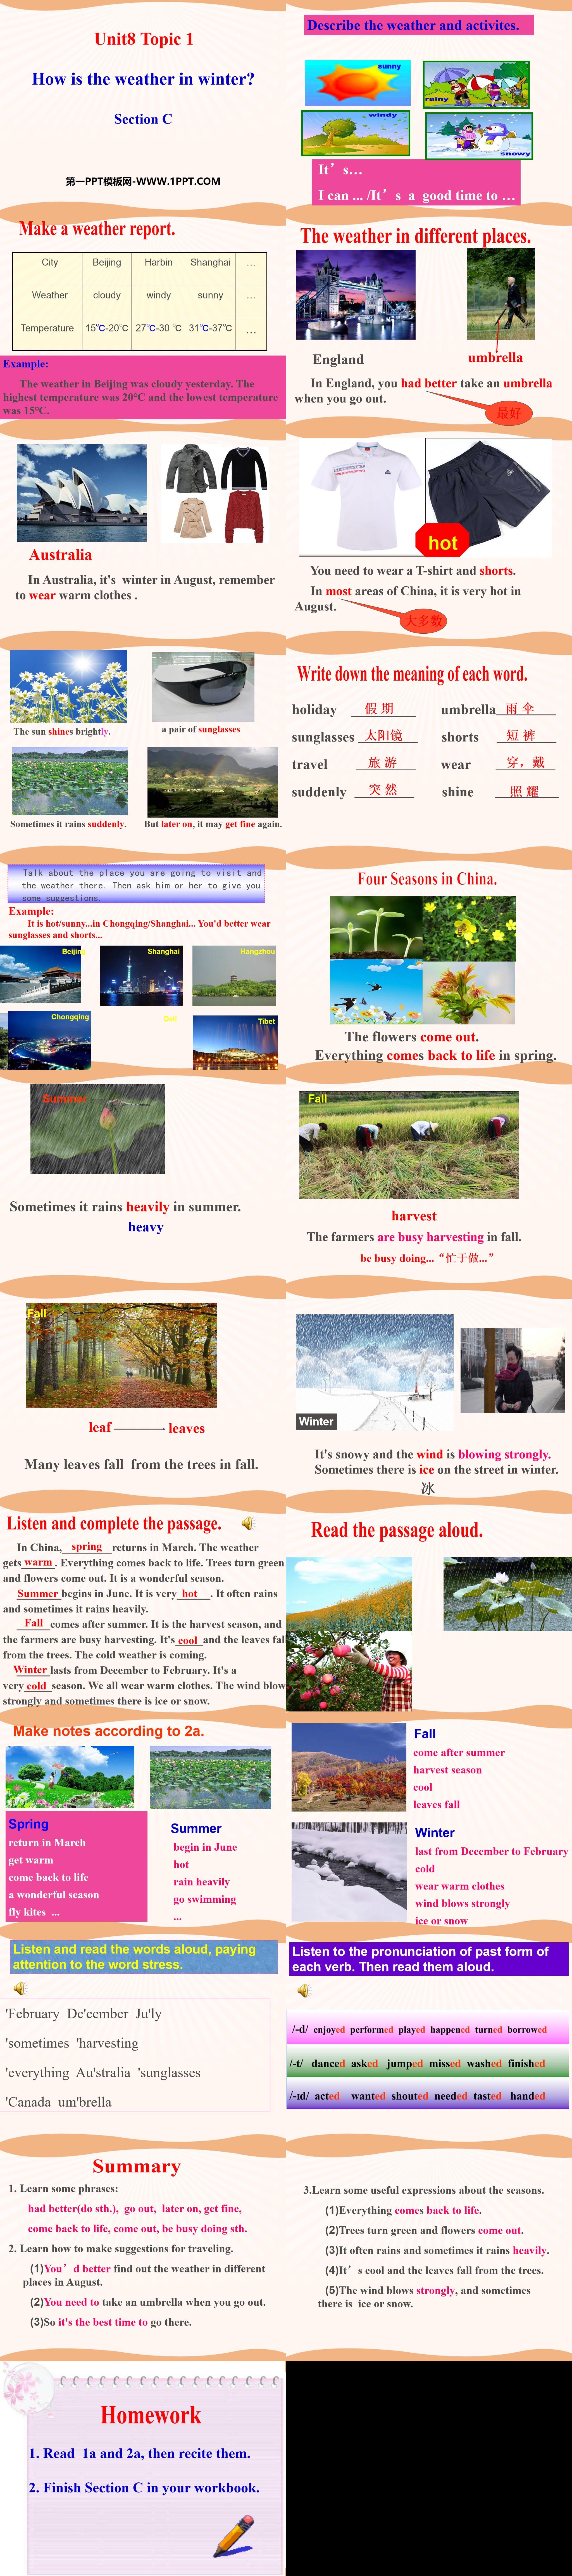 《How is the weather in winter?》SectionC PPT
（2）